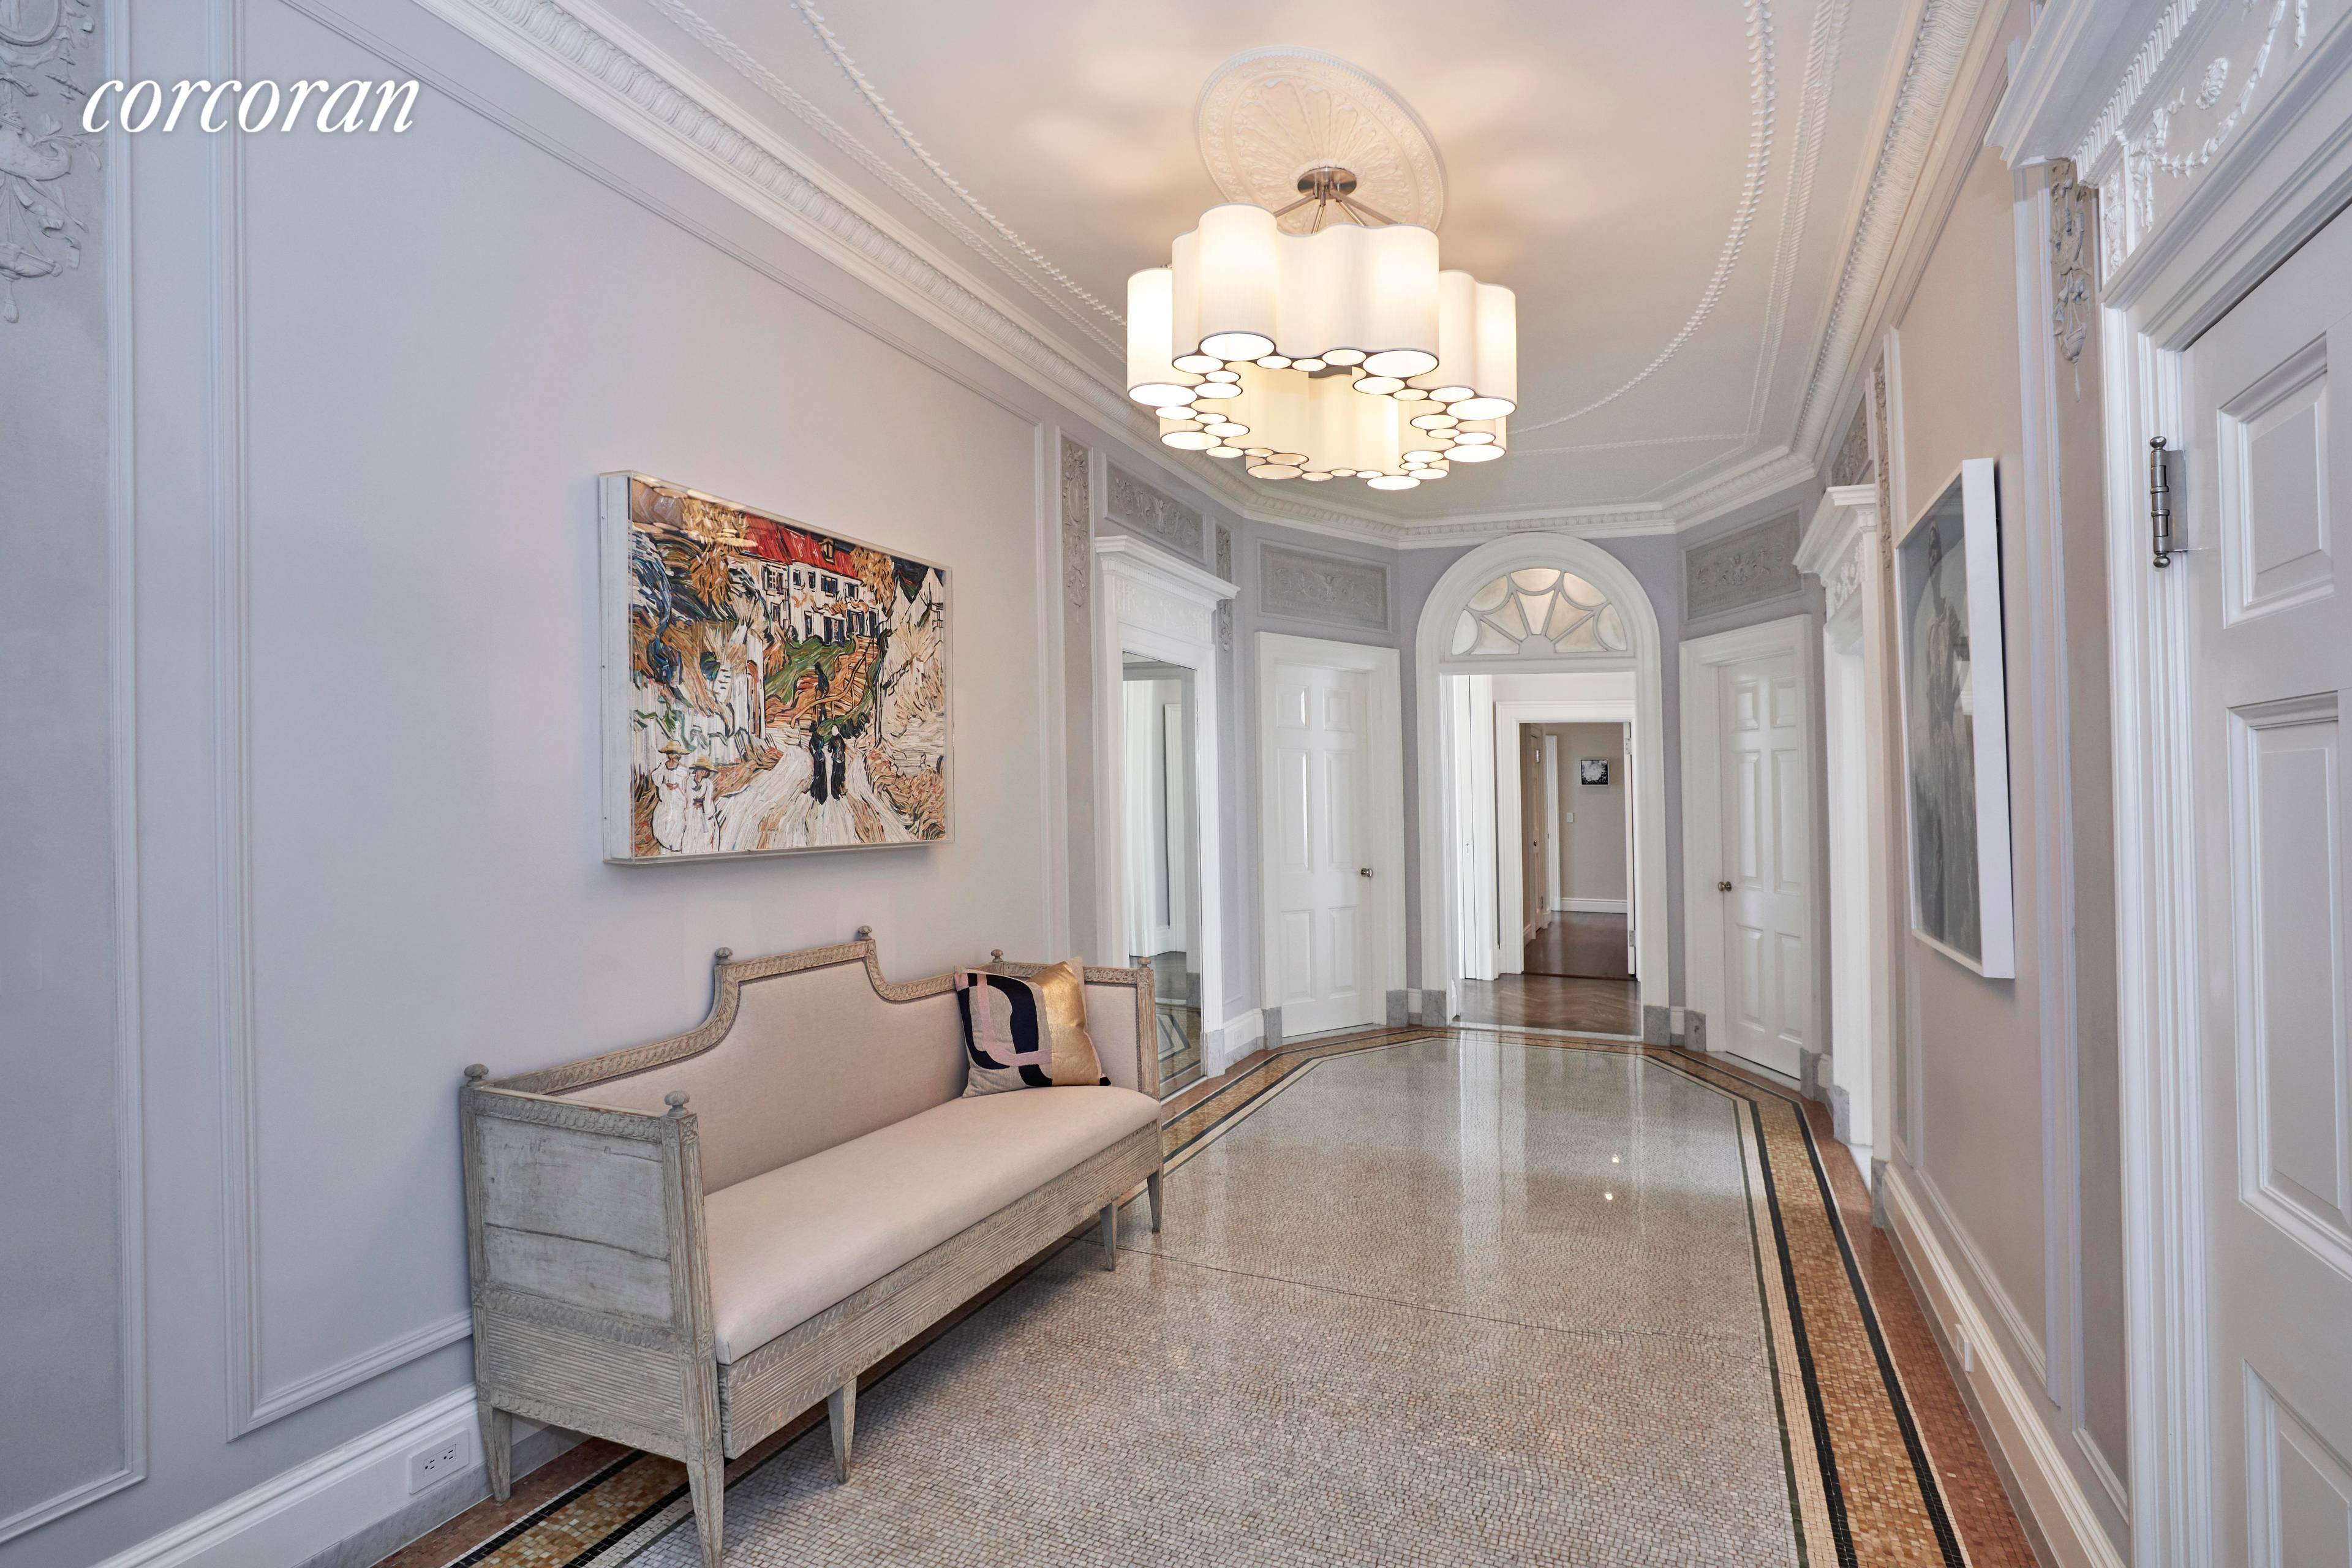 Famous for its classic architectural beauty, imposing structure and magnificent planted courtyard garden as well as intricately detailed apartments, the Apthorp has become the gold standard among prewar condominiums on ...